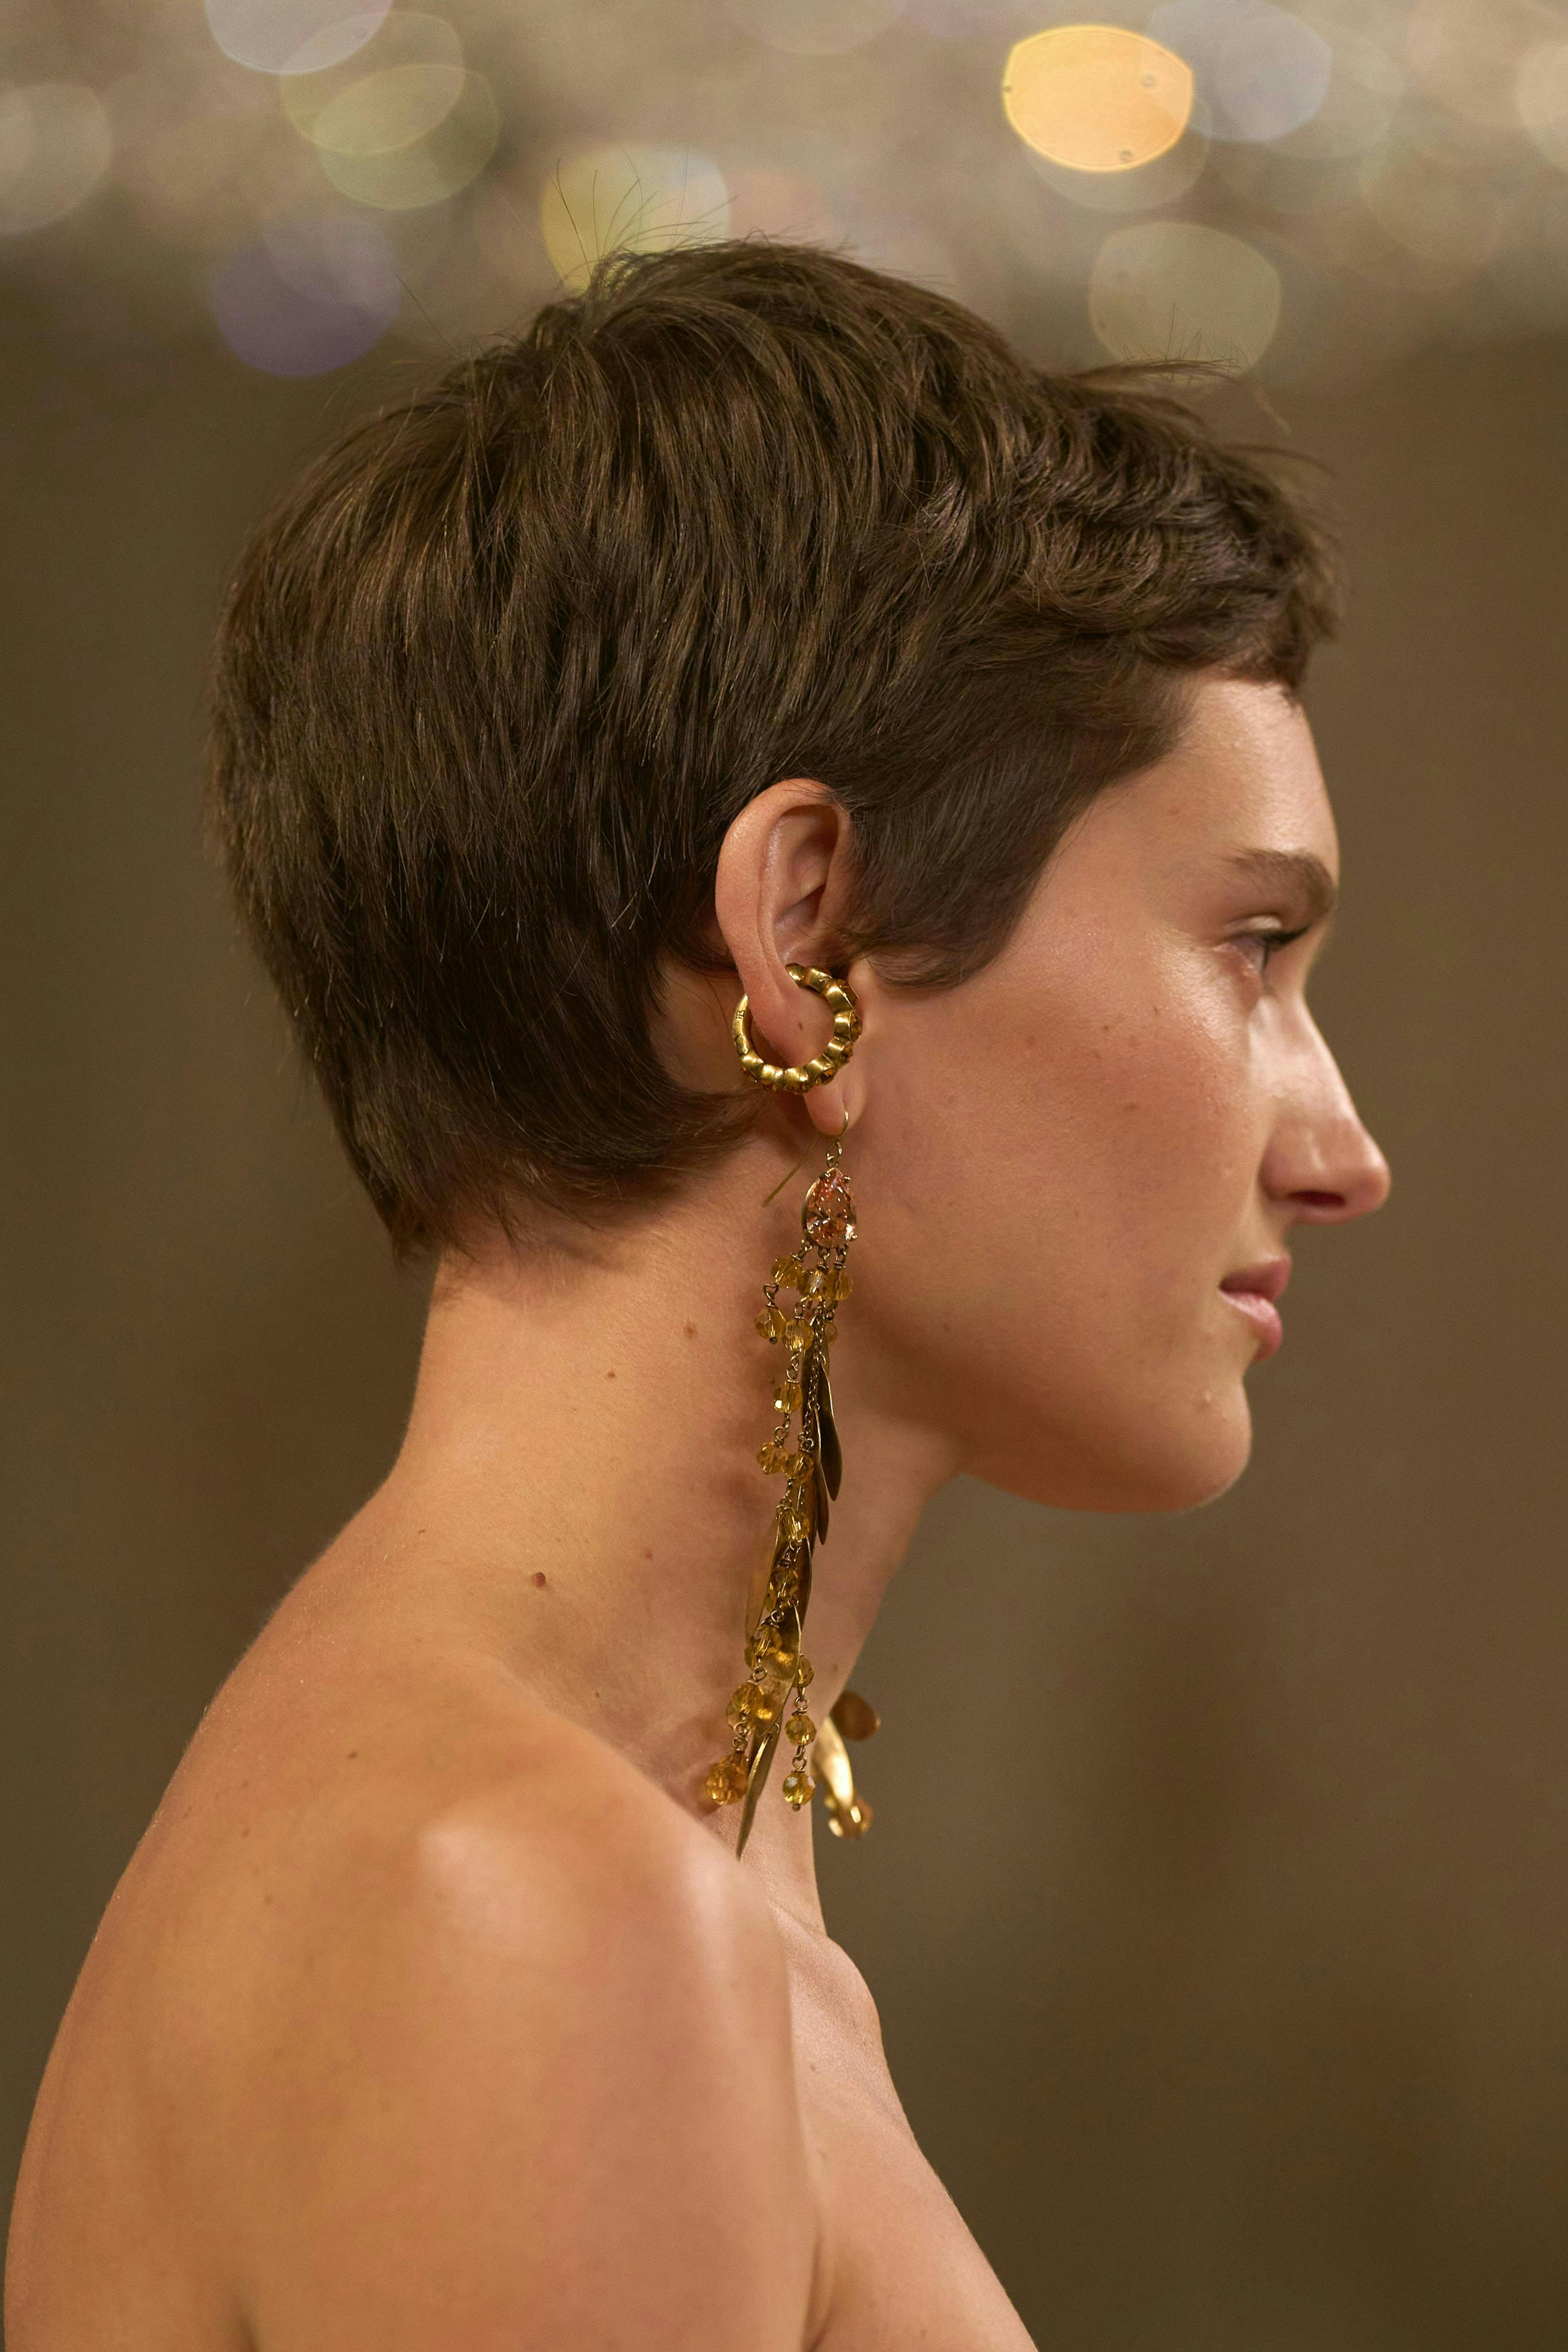 Side profile of woman with pixie cut.